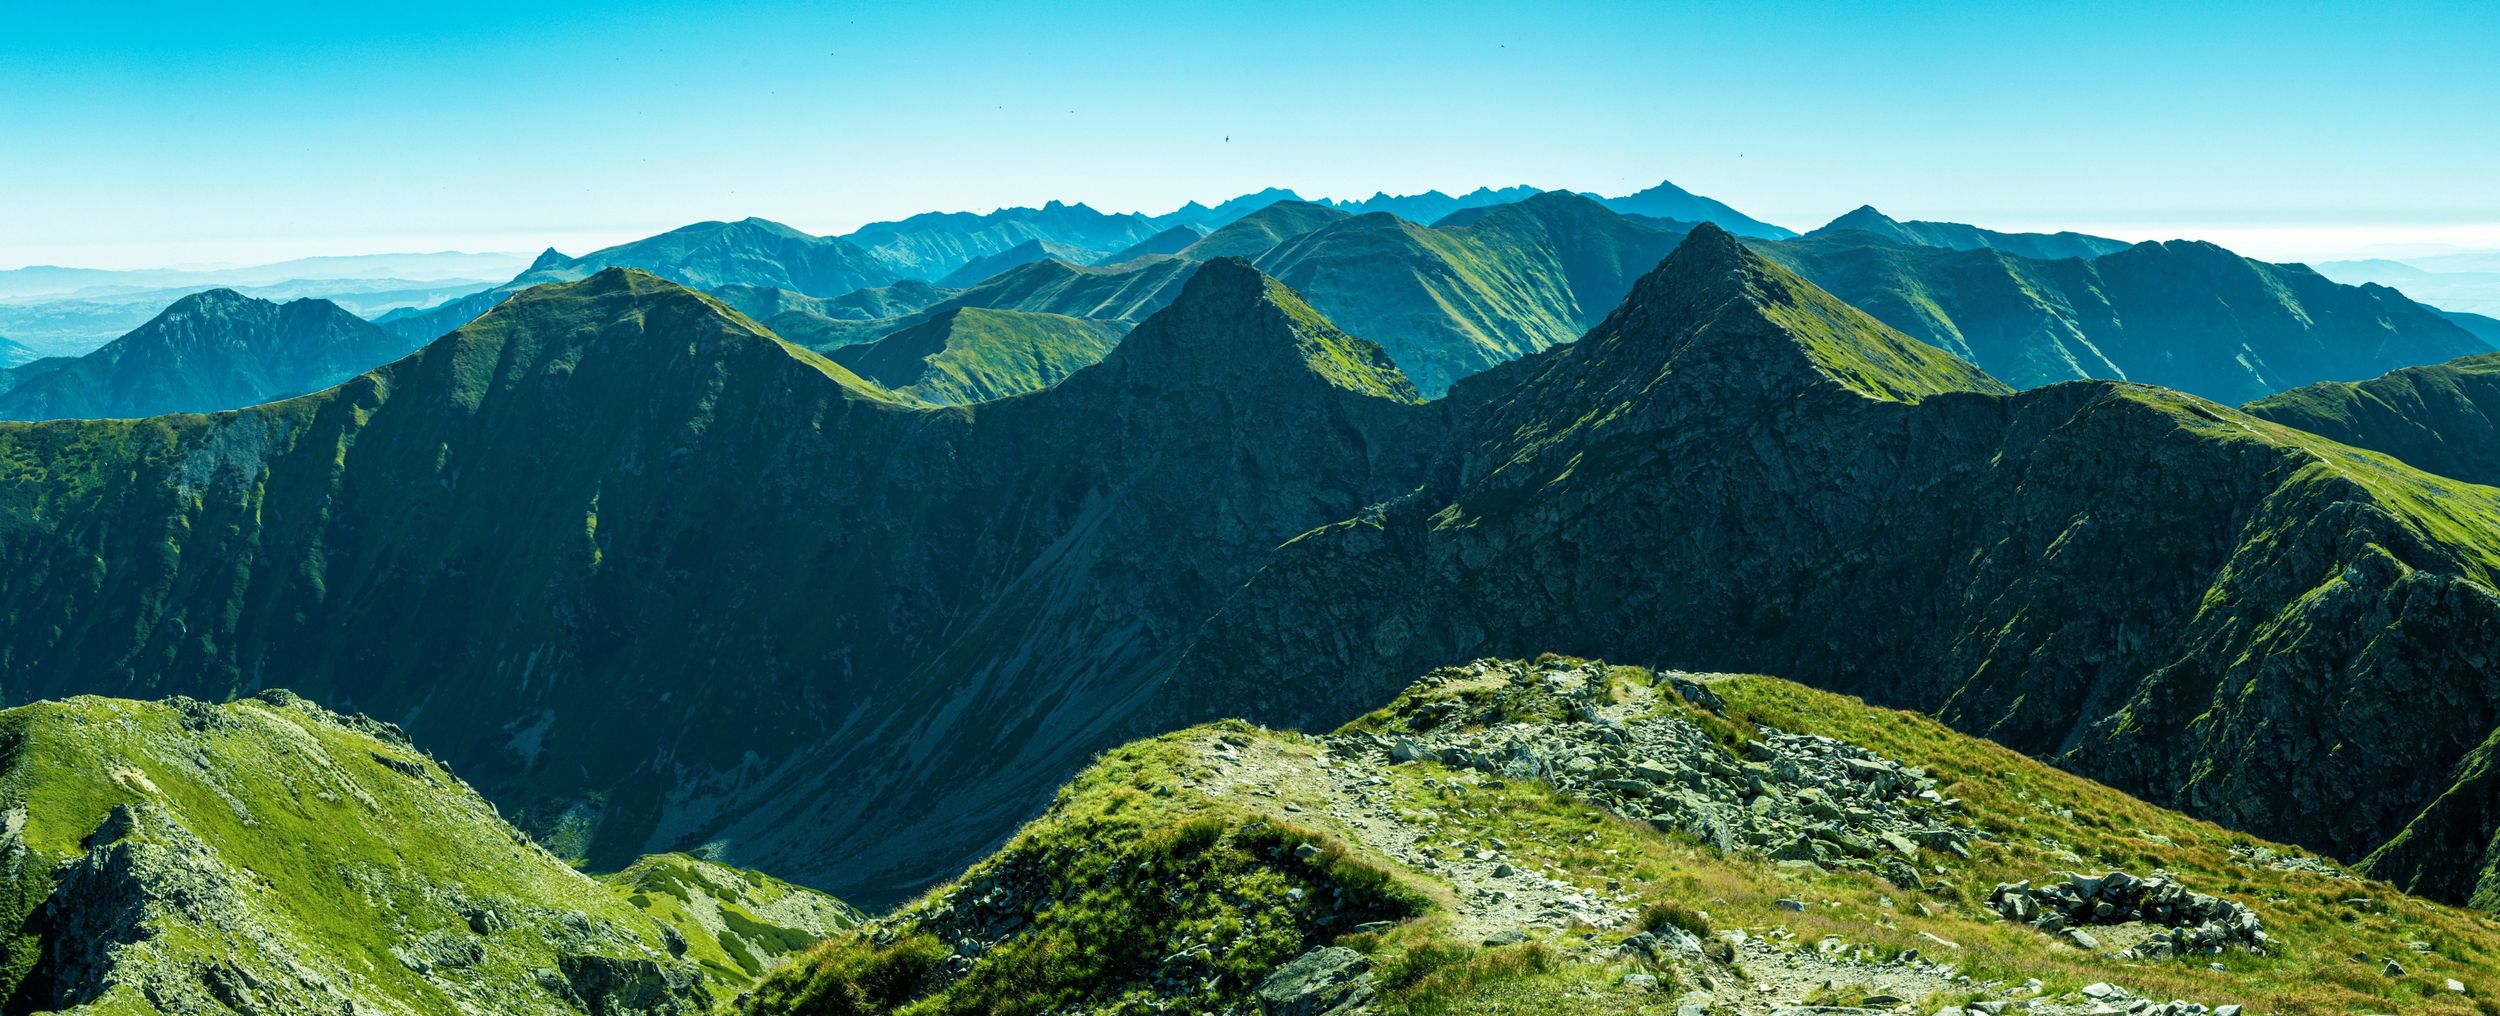 View of the trail leading along the ridge of the Tatra Mountains in sunny weather.